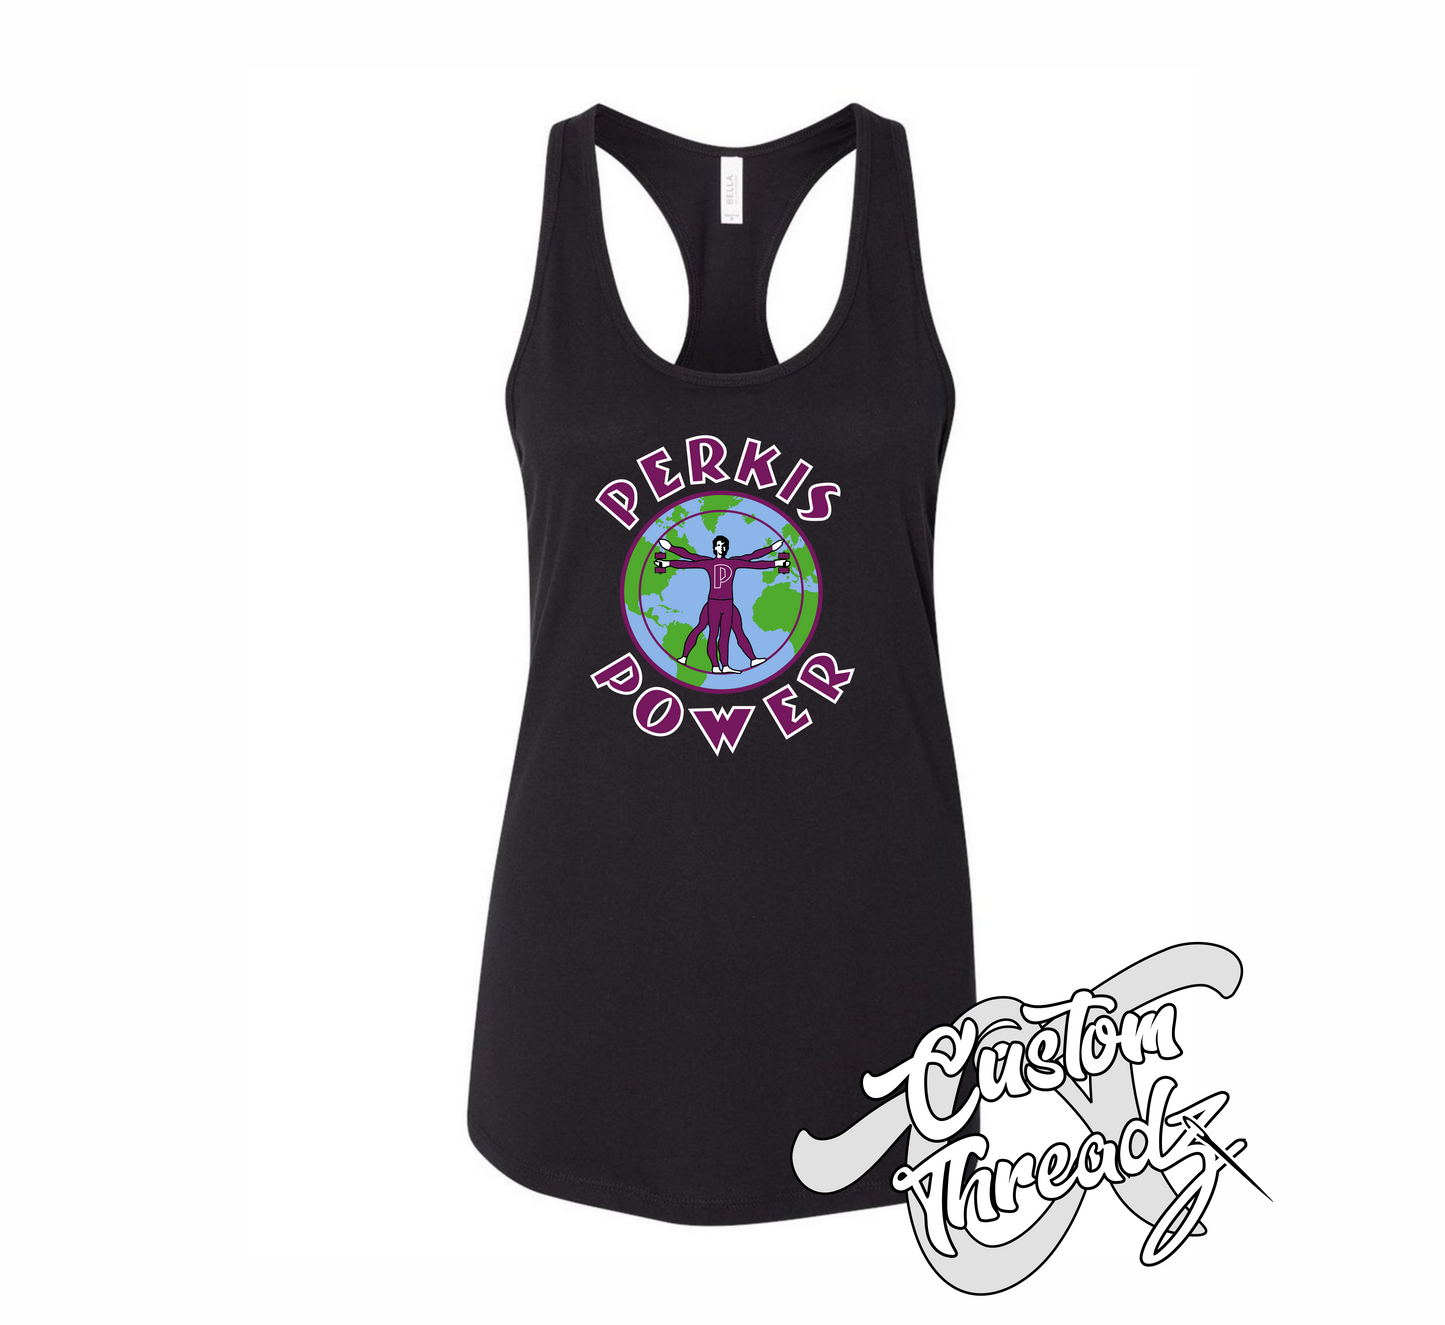 womens black tank top with perkis power heavyweights DTG printed design